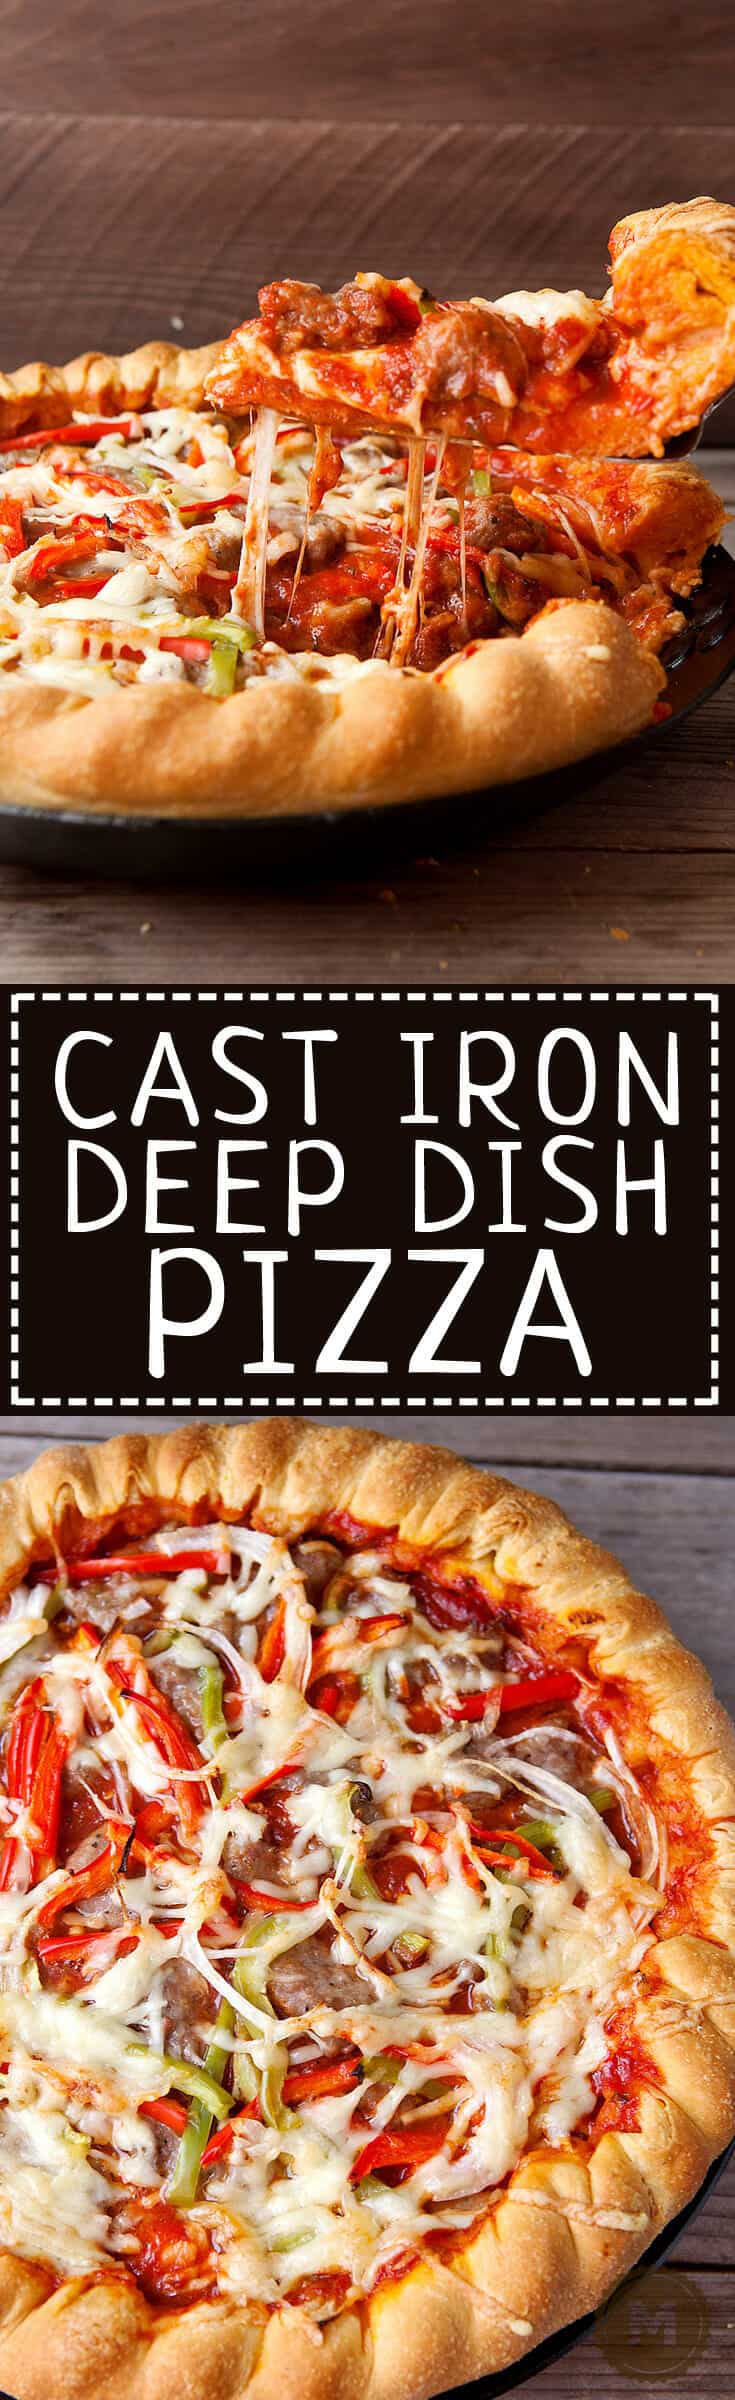 Cast Iron Deep Dish Pizza: This pizza is loaded with toppings and cheese and compiled in the traditional deep dish order (cheese on the bottom)! Cooking it in a cast iron skillet gives it a perfect, crispy crust. Included is my favorite homemade deep dish pizza crust recipe, but you can also make it with store-bought crust!